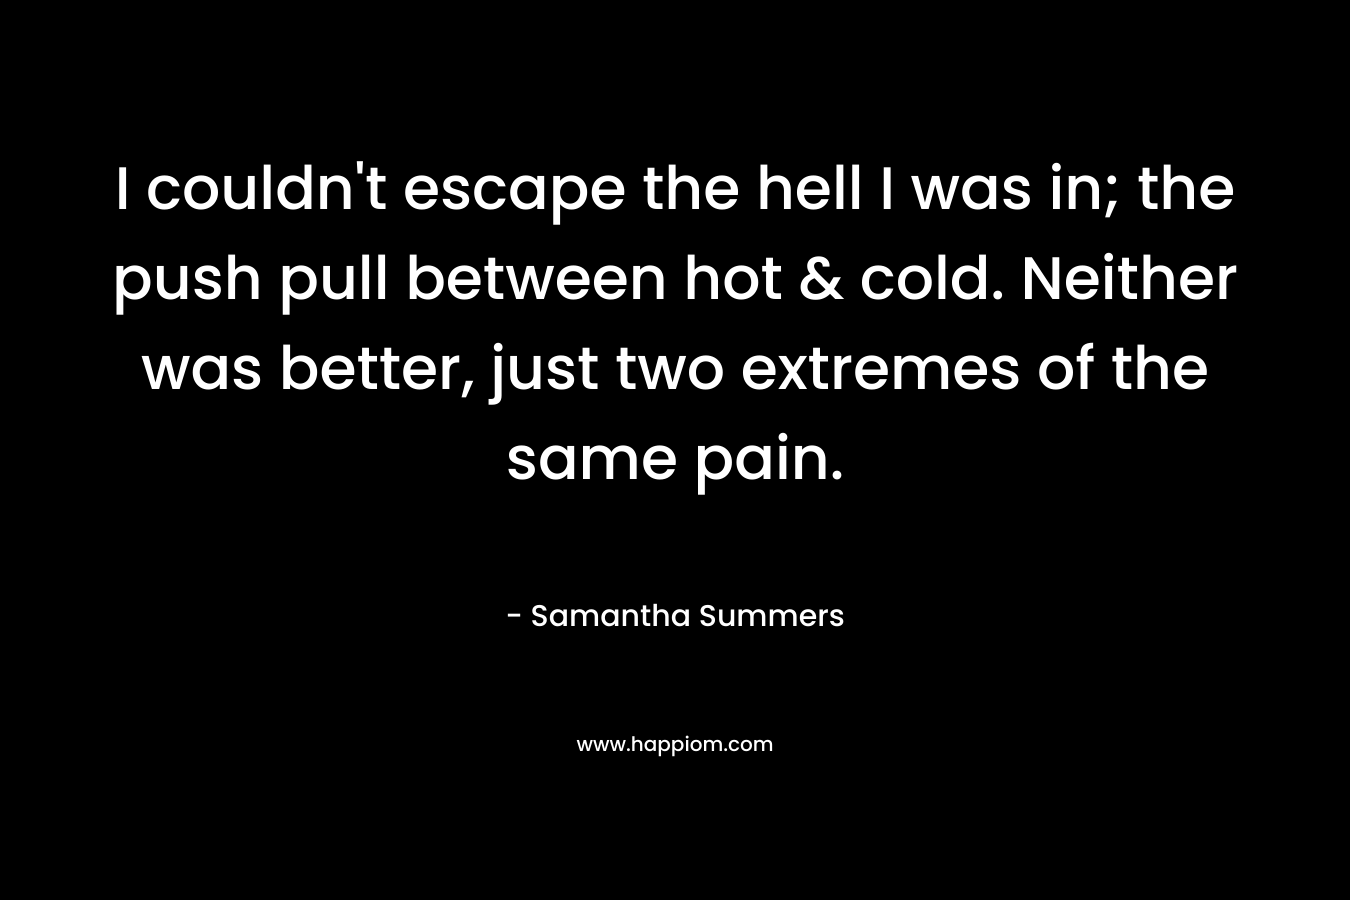 I couldn’t escape the hell I was in; the push pull between hot & cold. Neither was better, just two extremes of the same pain. – Samantha Summers